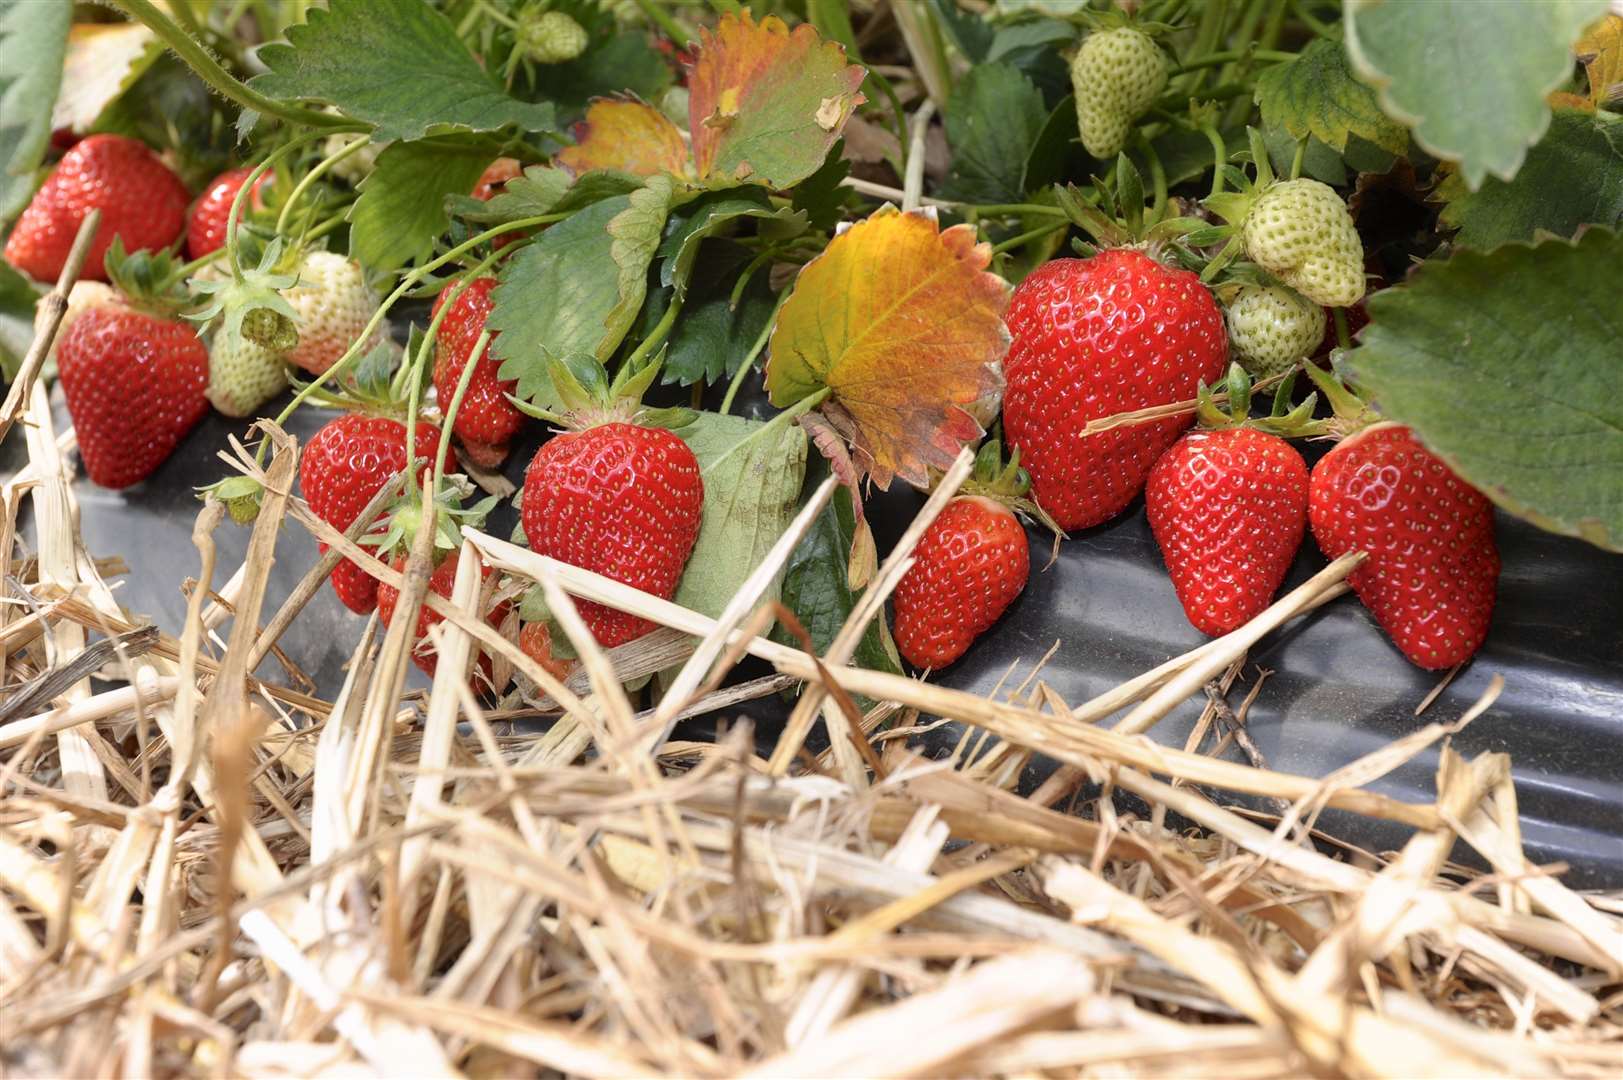 Kent crops such as strawberries could be affected by the impact of the coronavirus outbreak. Picture: Andy Payton